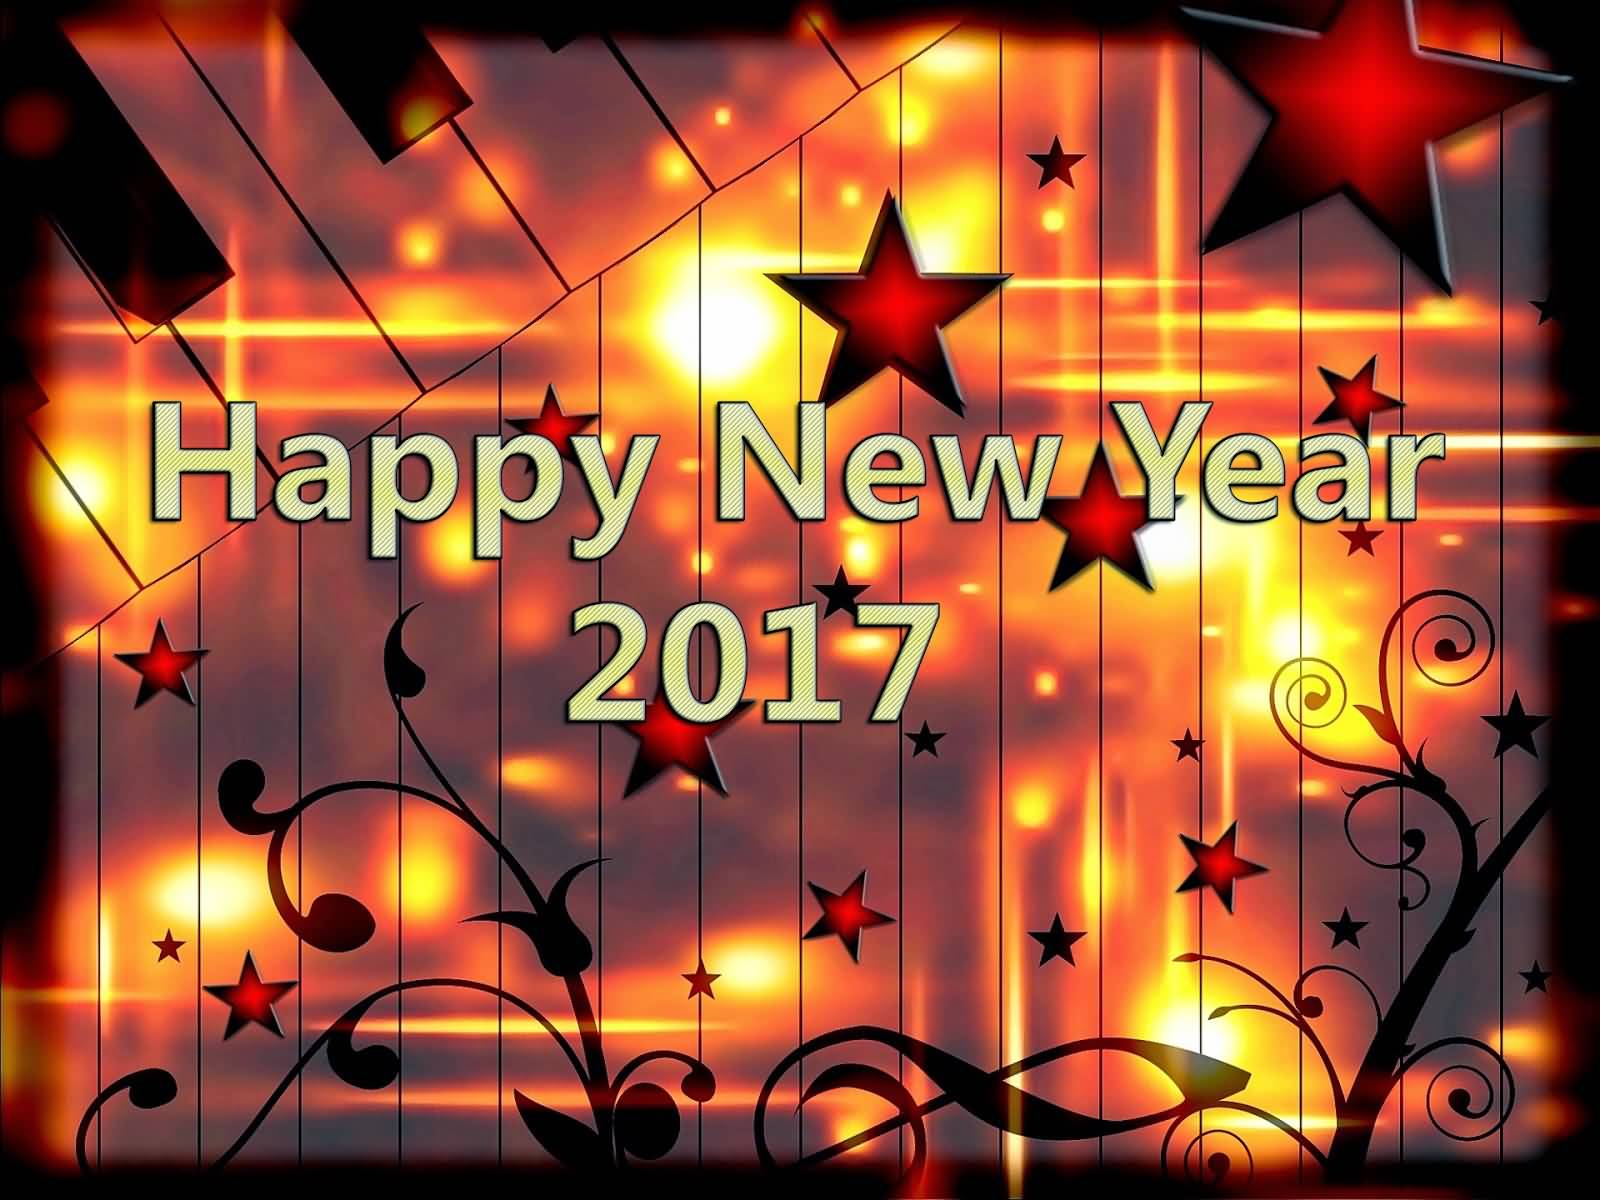 Happy New Year 2017 To You And Your Family